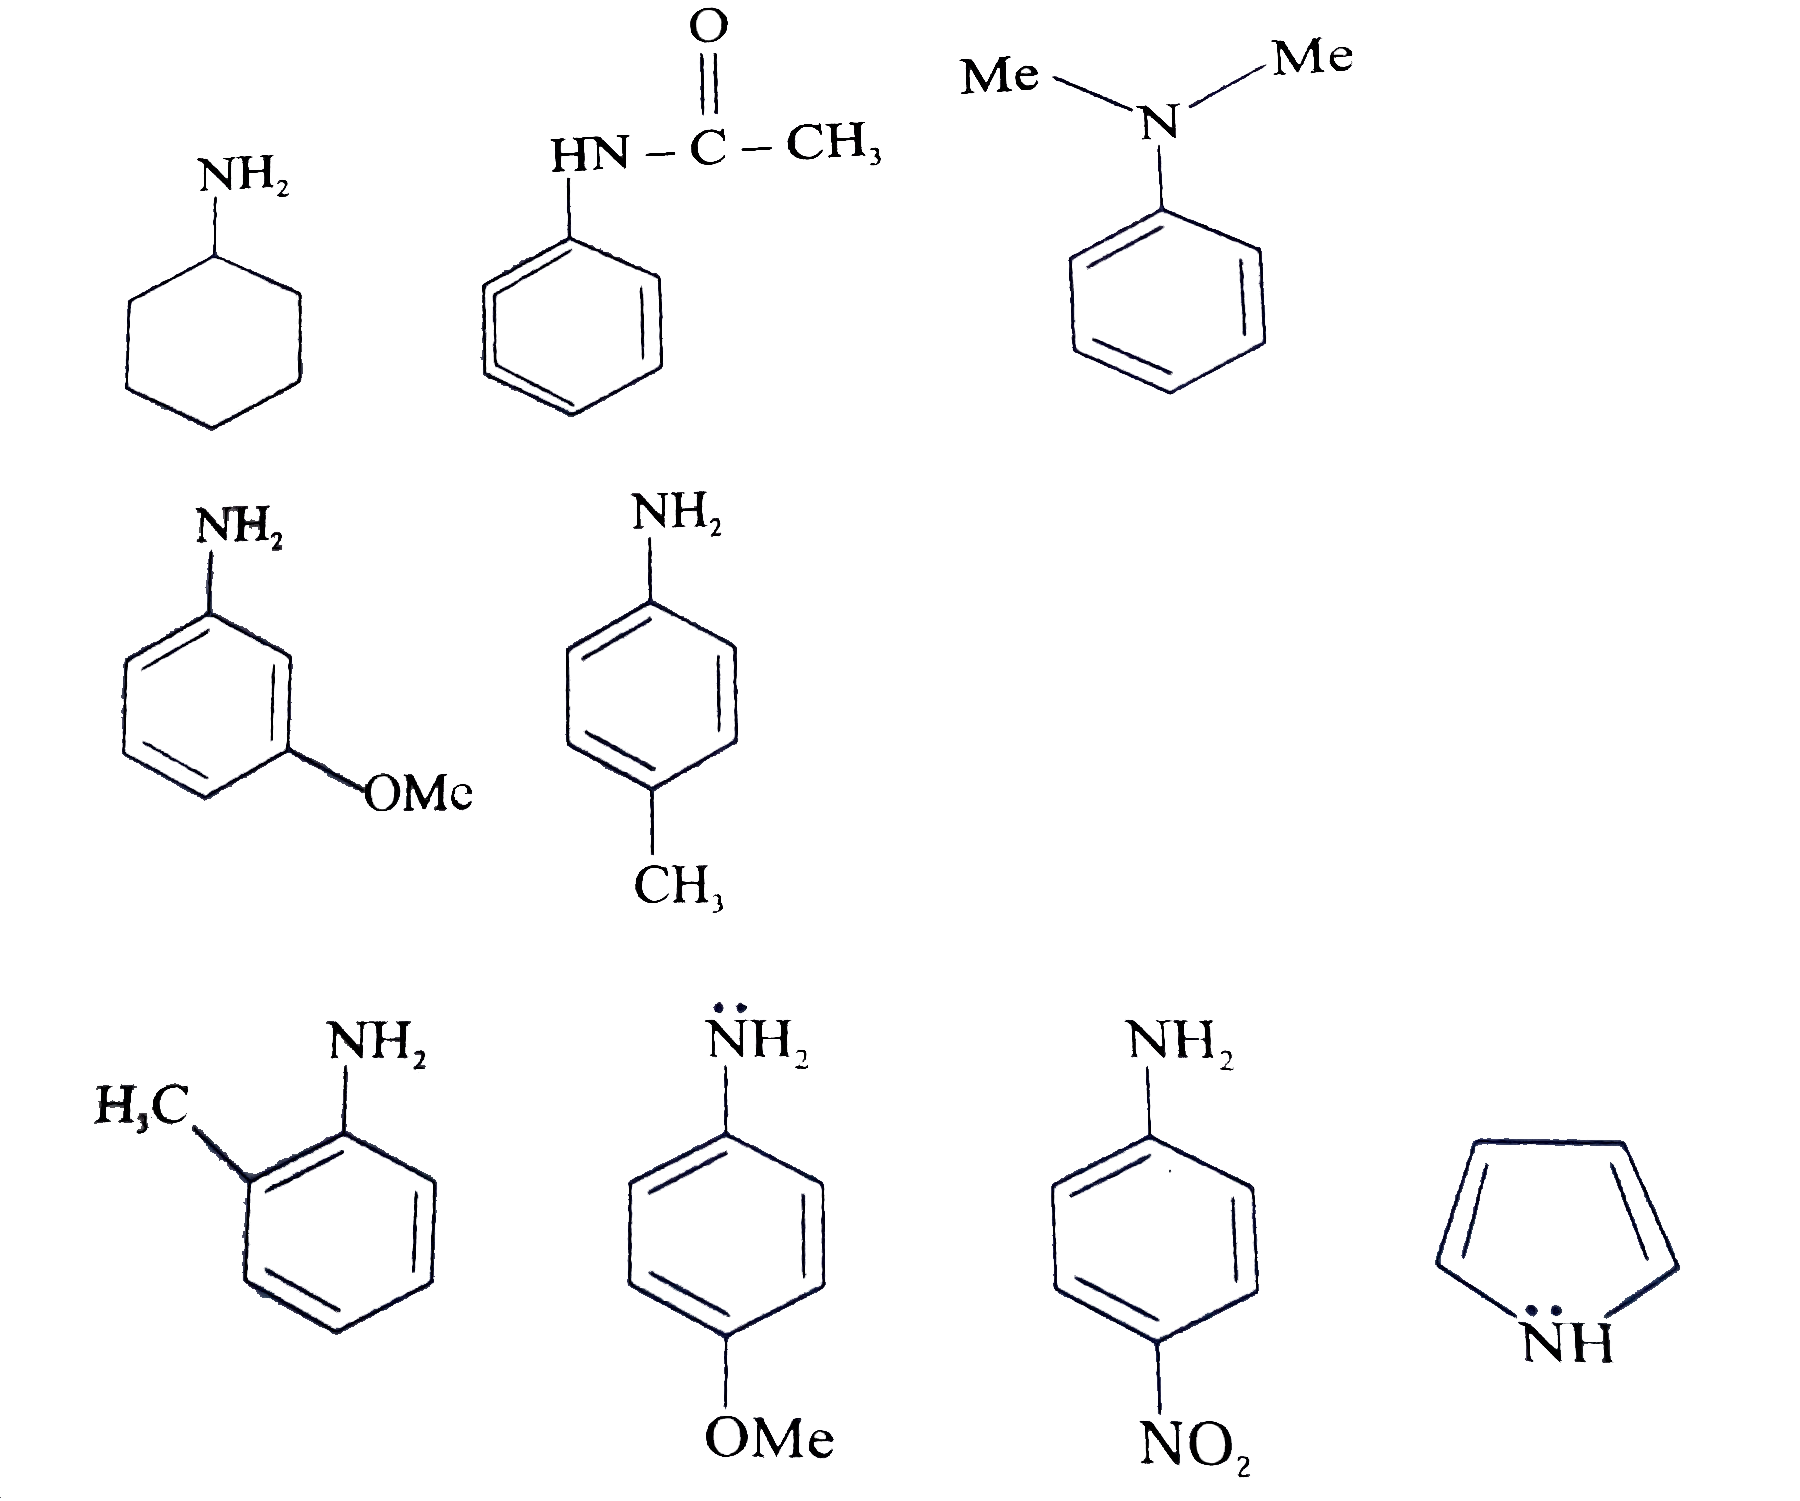 Among the following compounds how many of them is more basic than aniline?